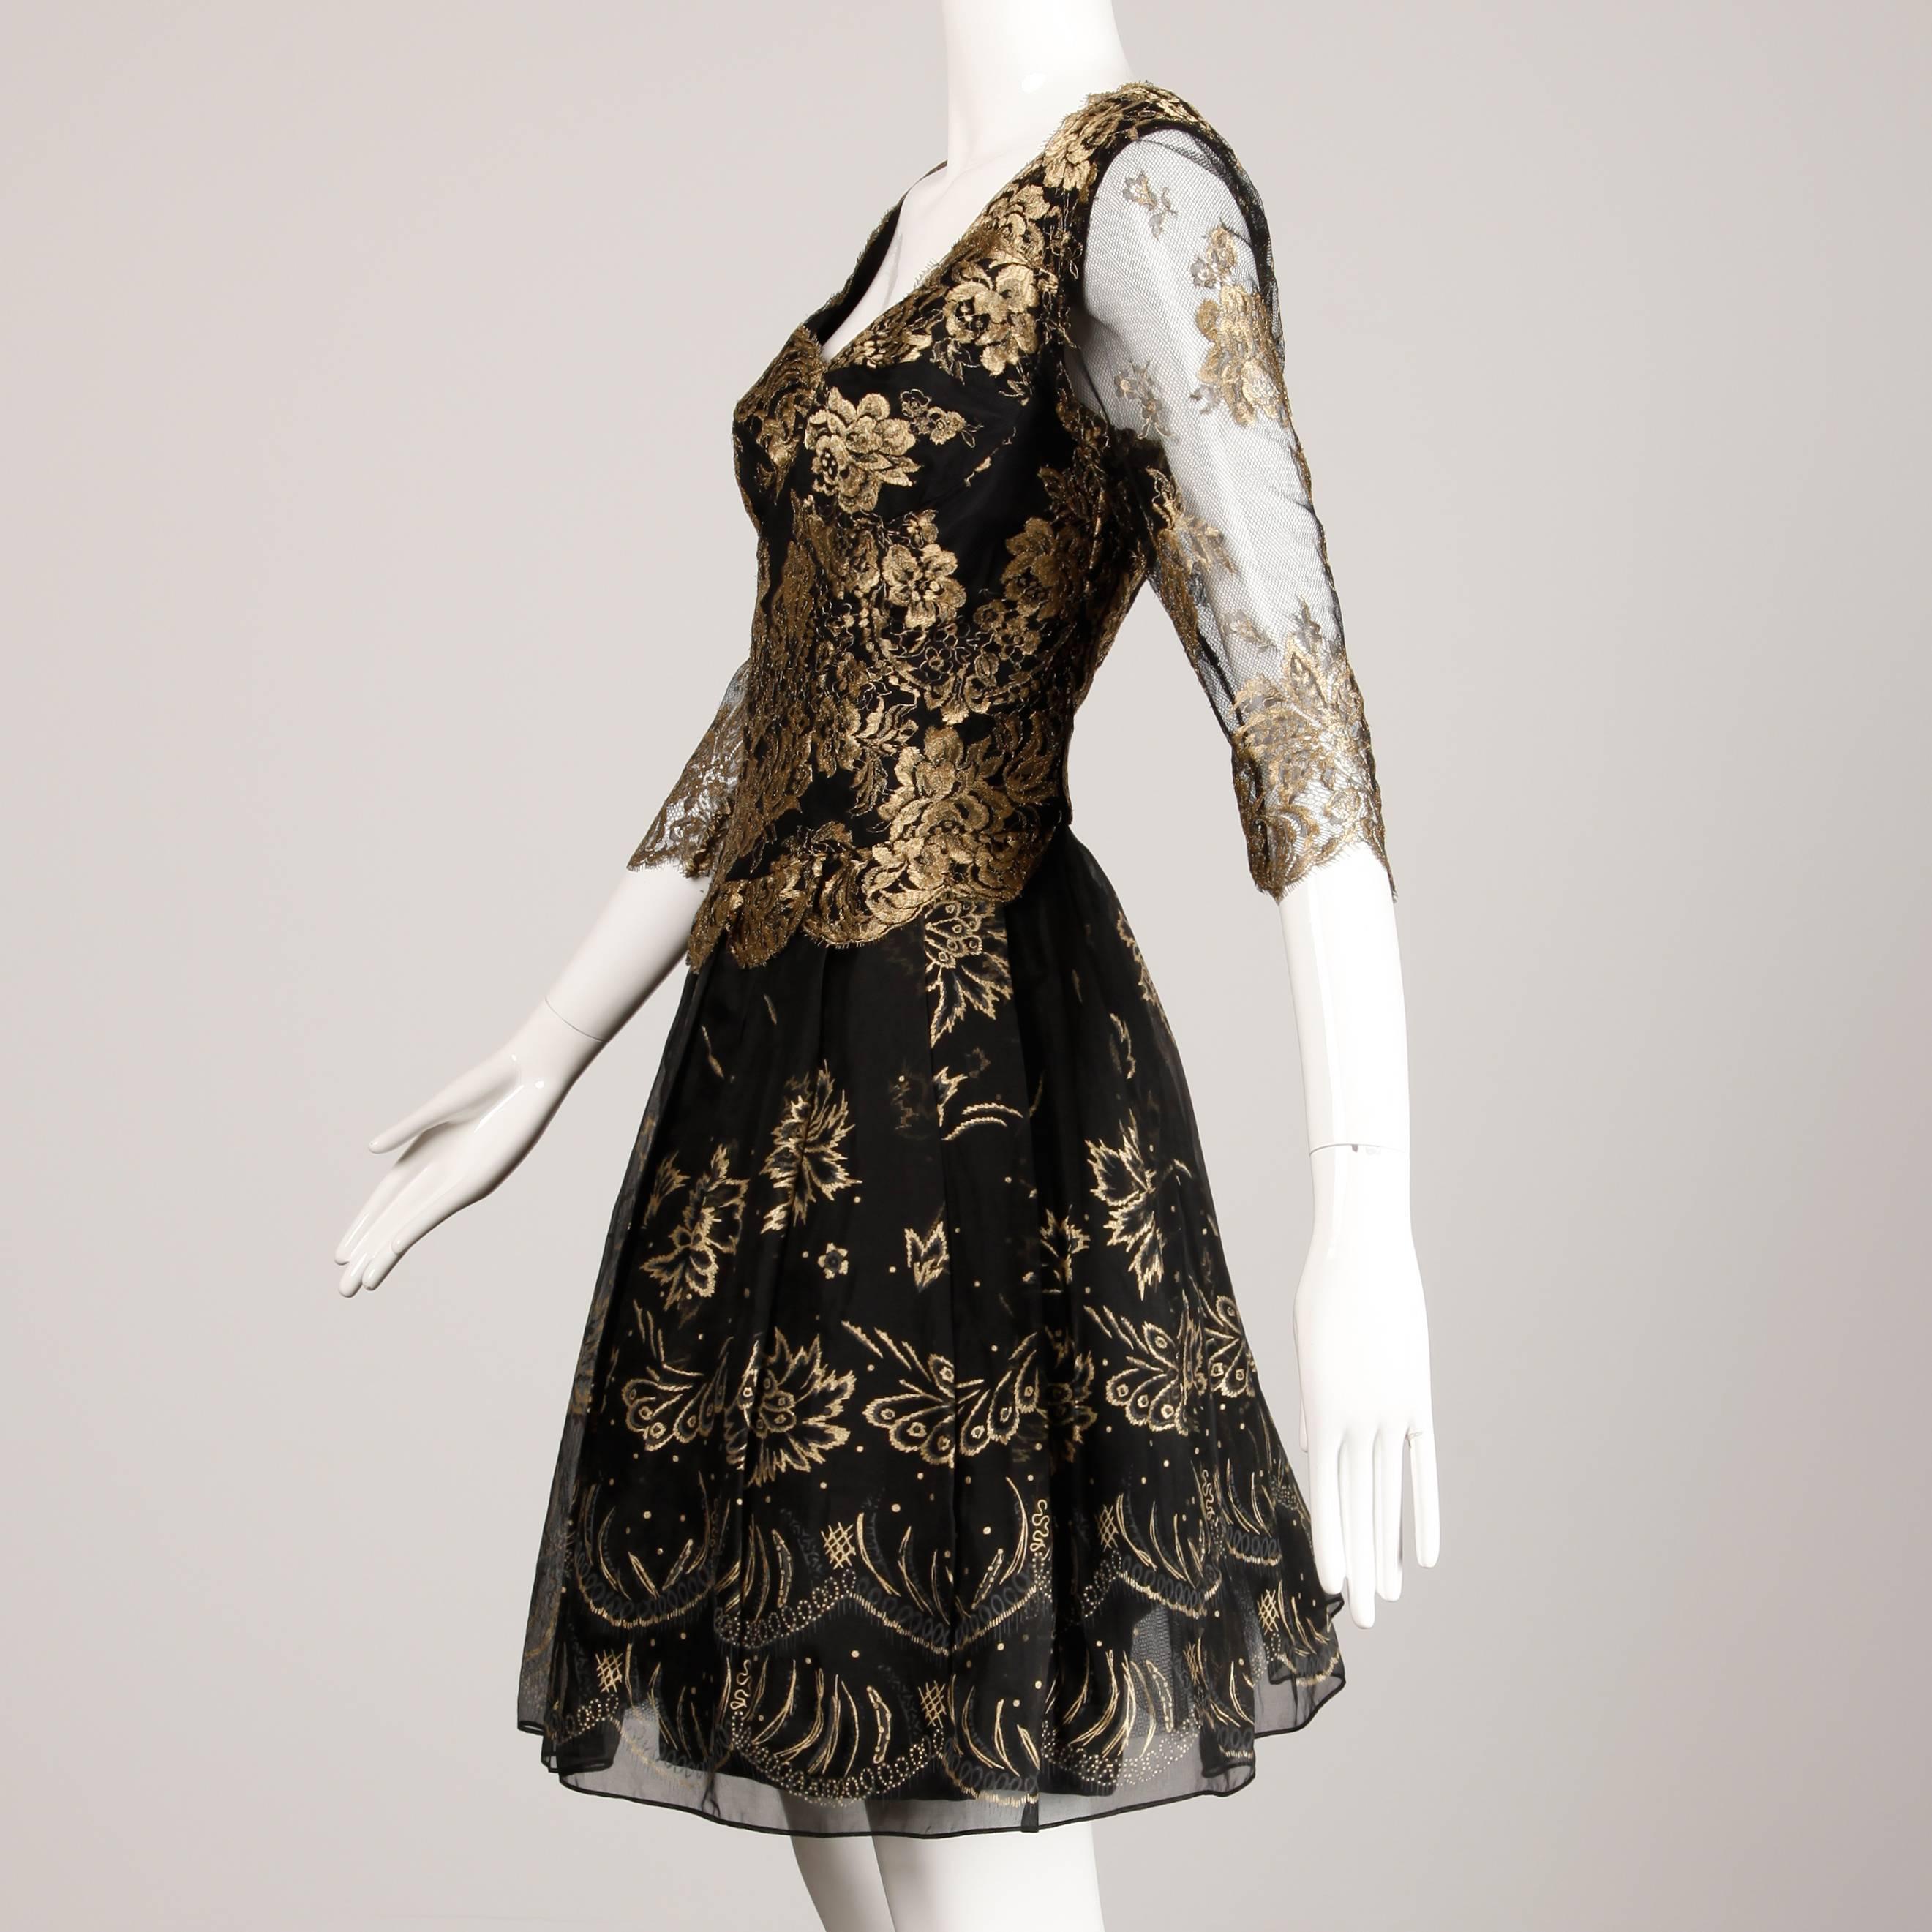 1980s Zandra Rhodes Vintage Metallic Gold Lace + Silk Hand Painted Dress In Excellent Condition For Sale In Sparks, NV